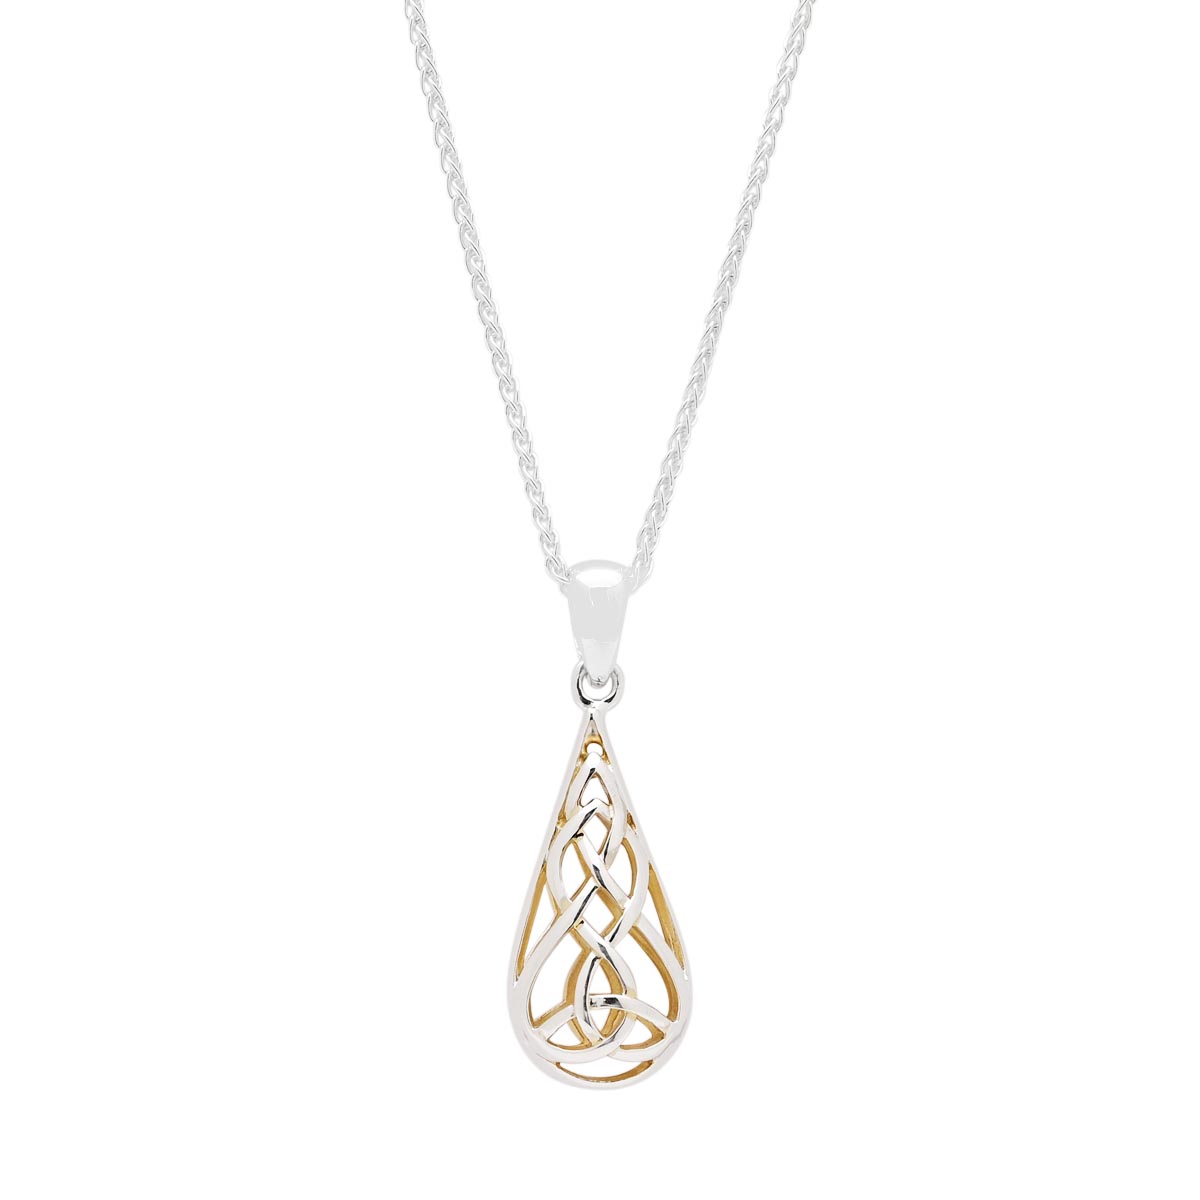 Keith Jack Trinity Teardrop Necklace in Sterling Silver with 22kt Yellow Gold